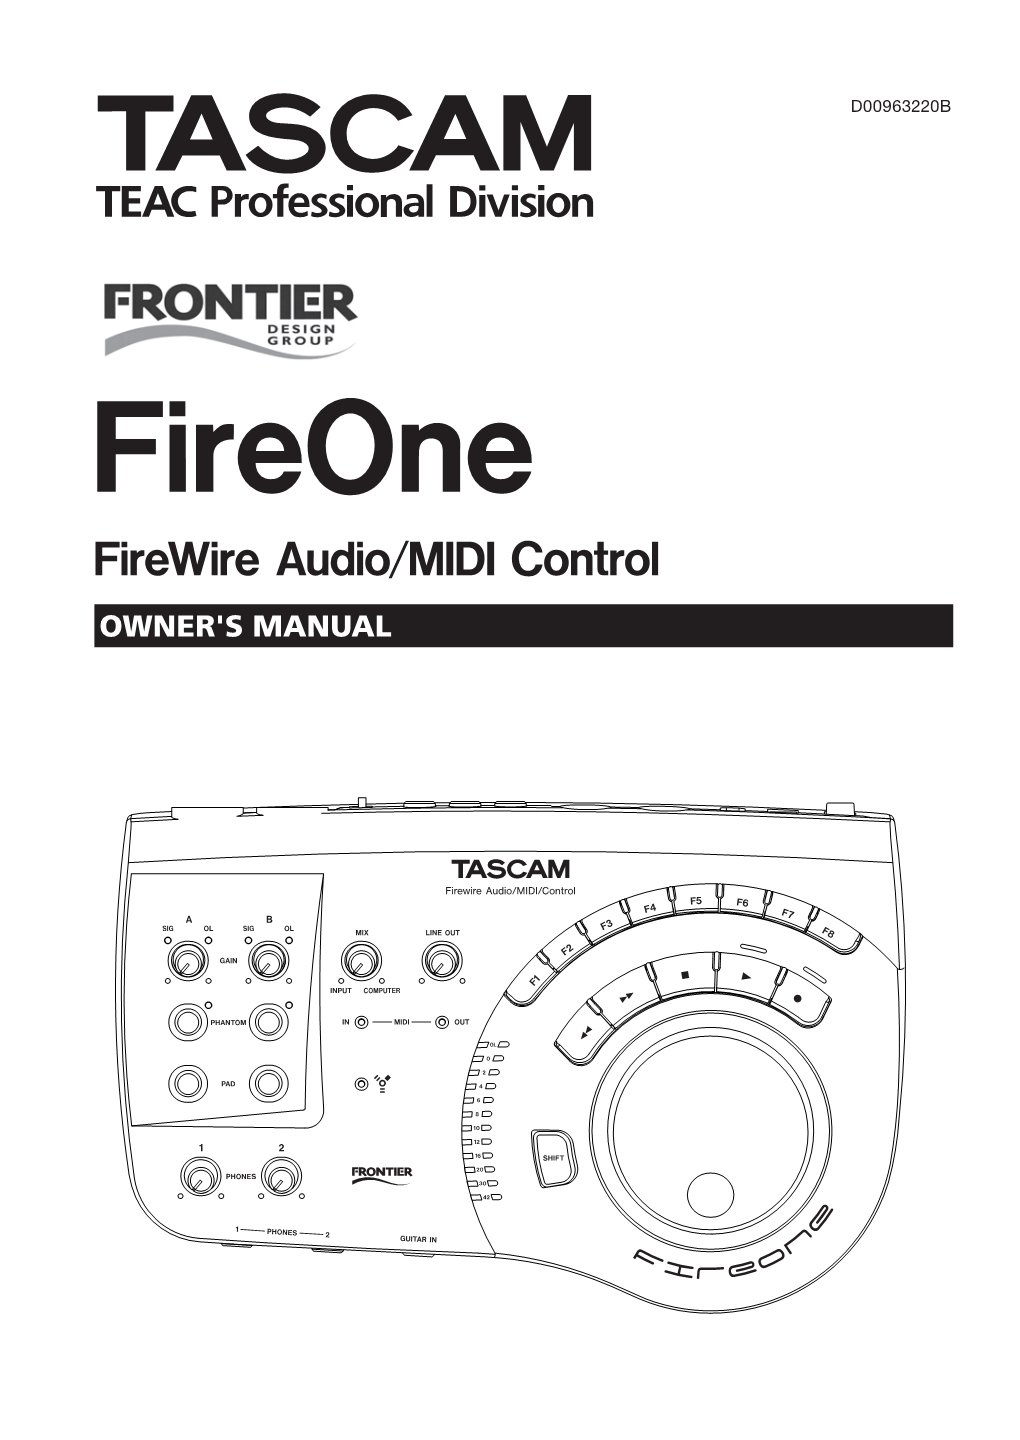 Tascam Fireone Owner's Manual